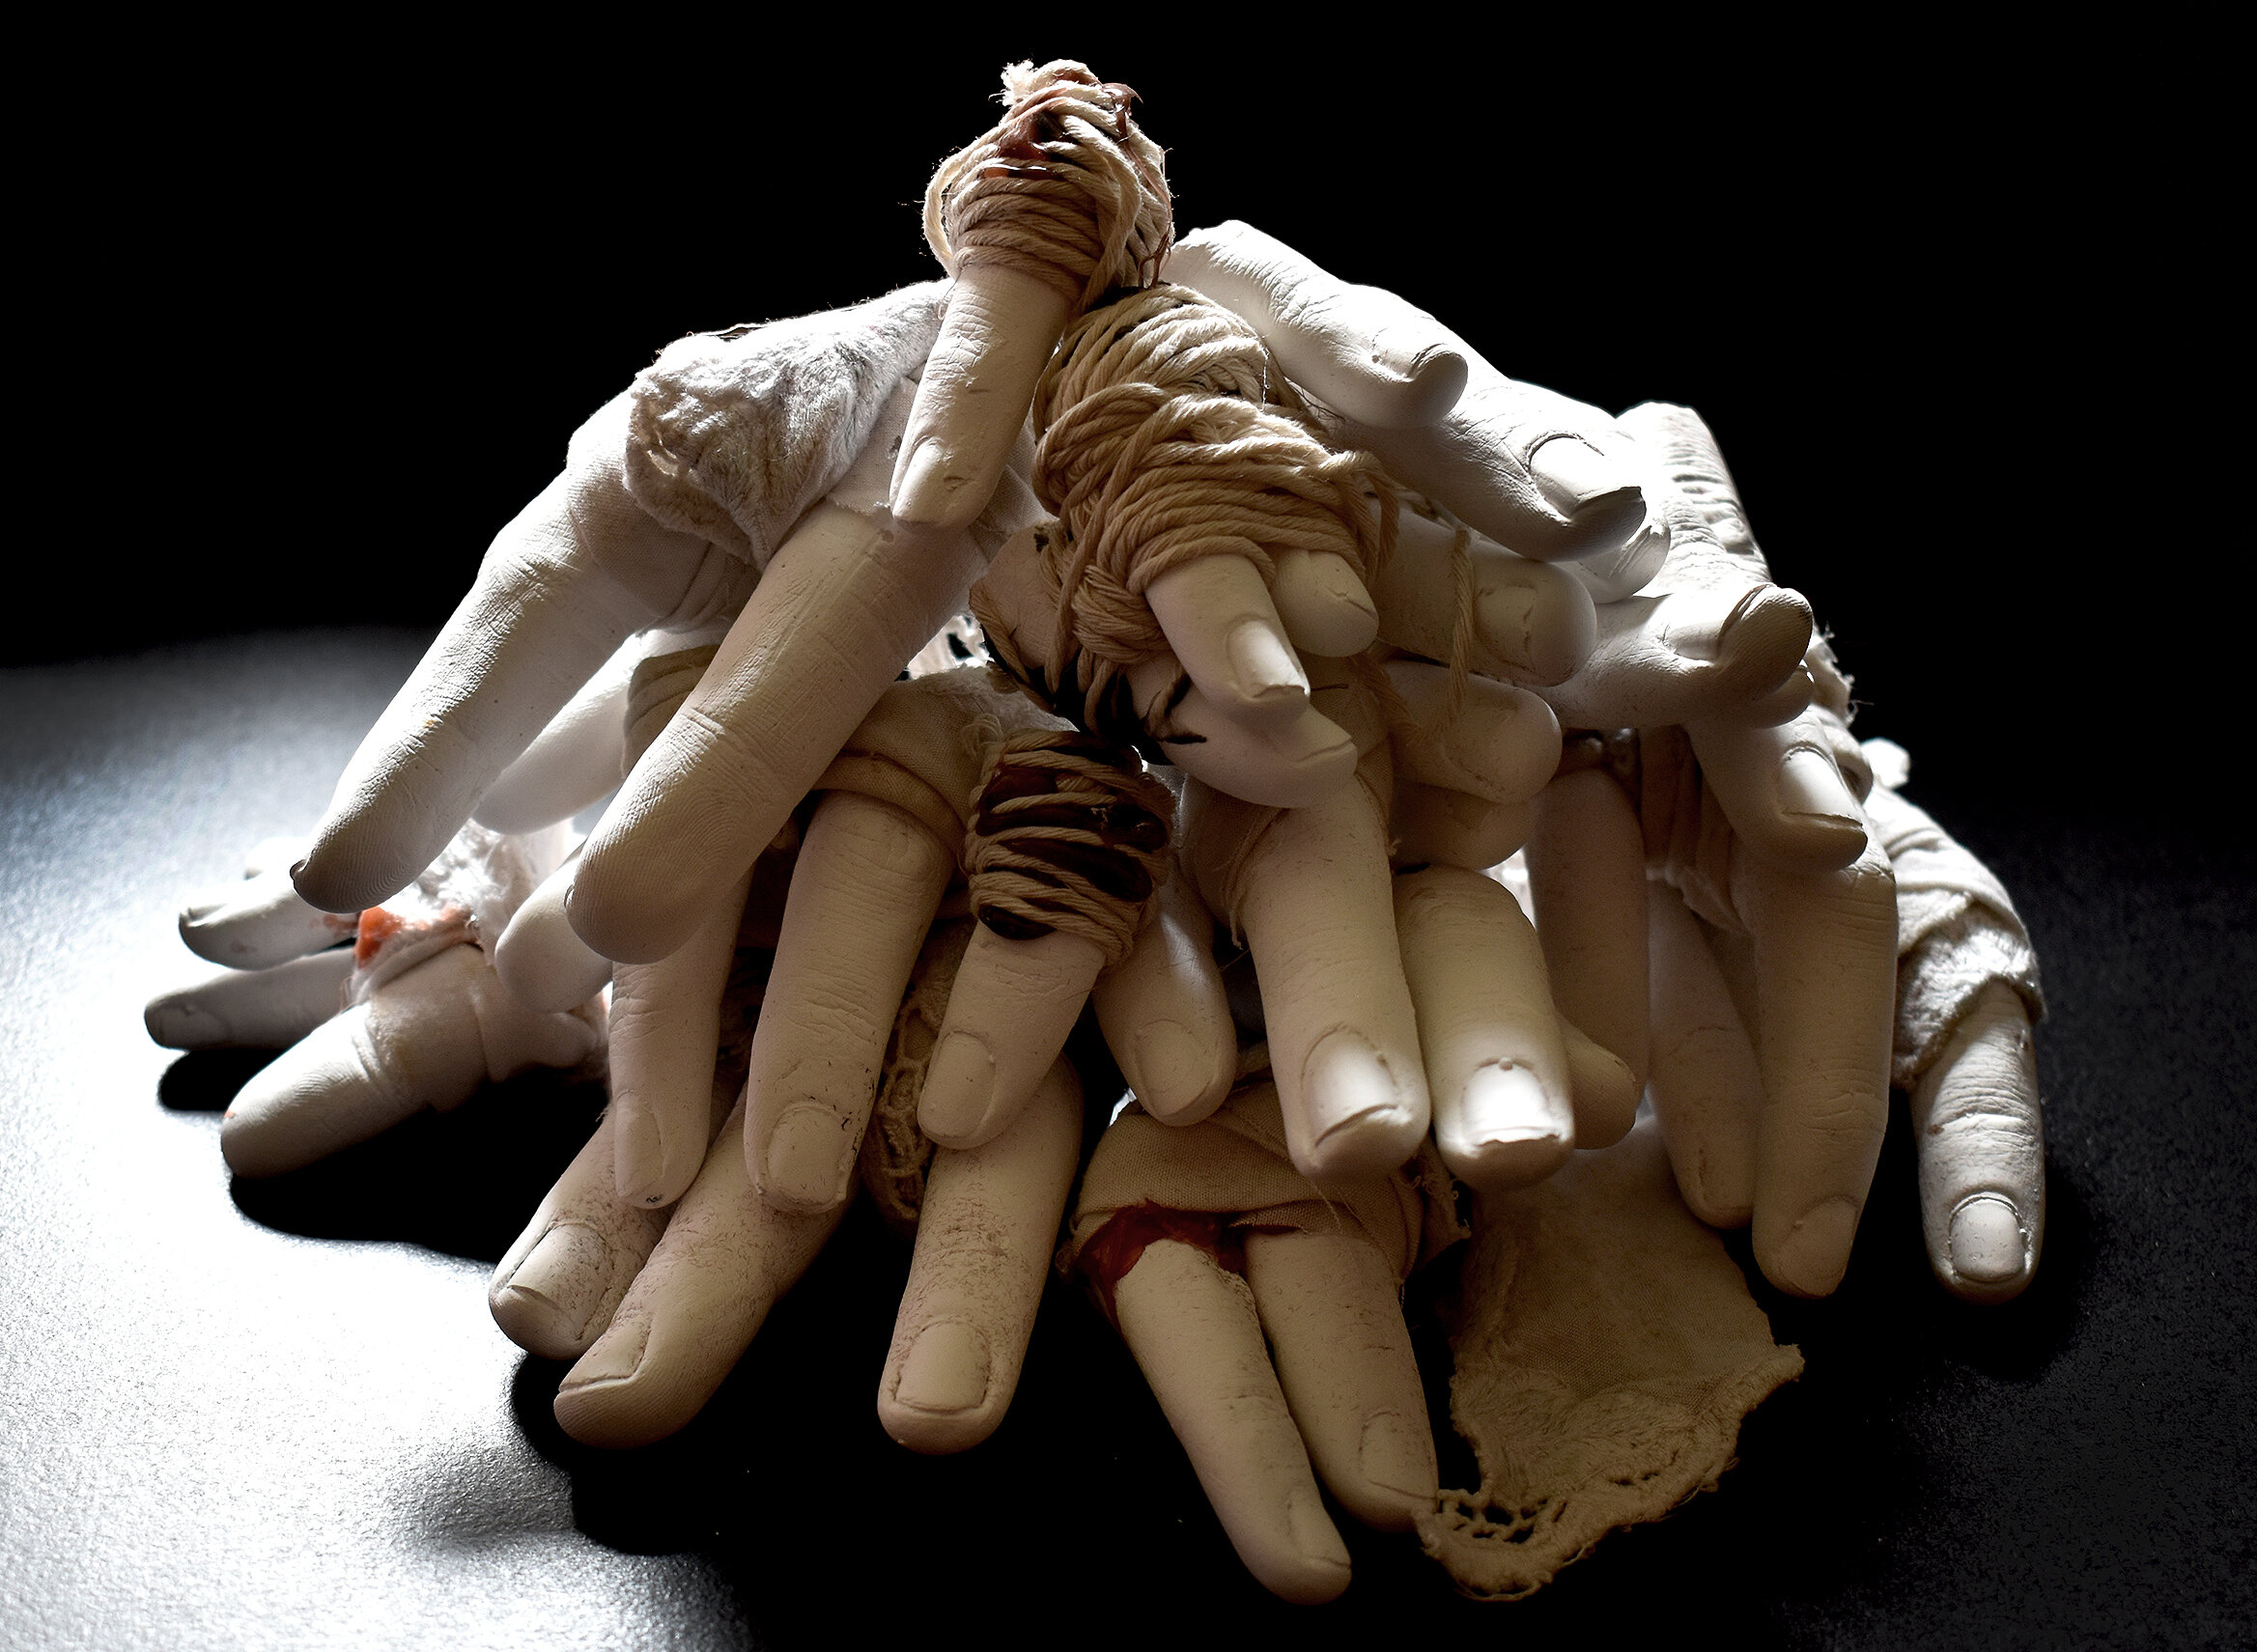   Cast Feelings , 2020, Plaster, paint, glue, cloth, string, Dimensions variable.  